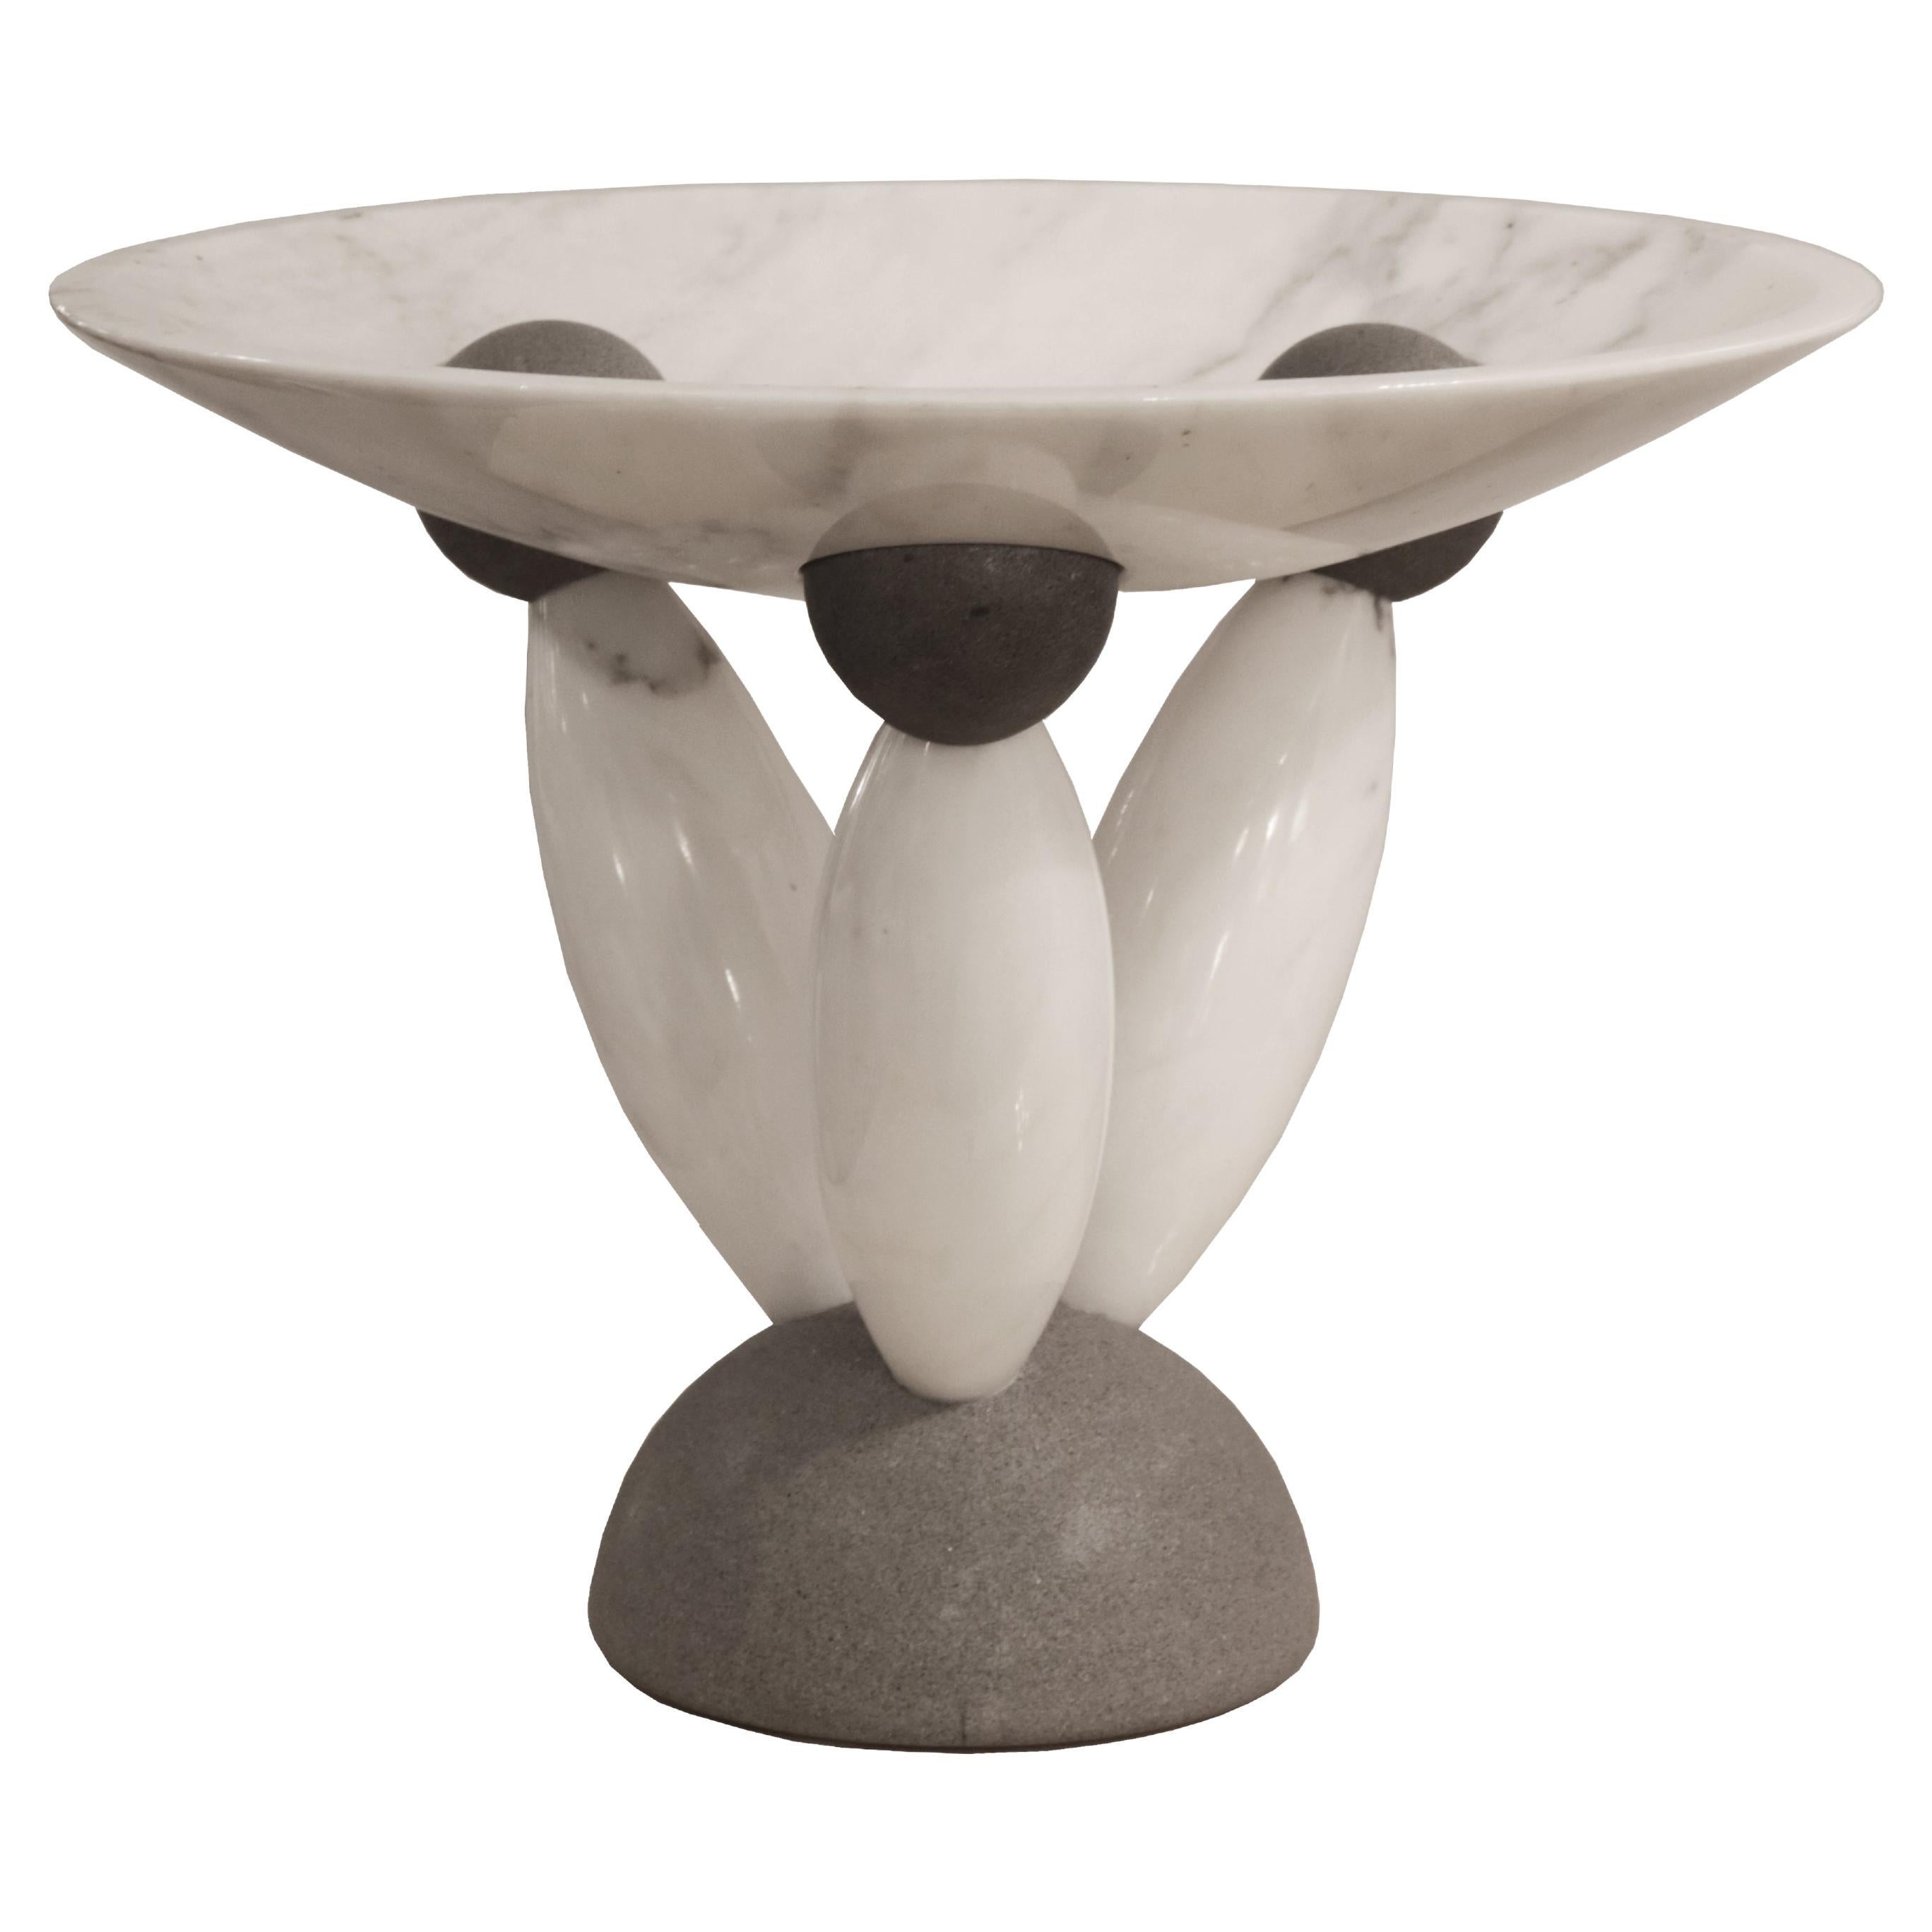 Matteo Thun Modernist Marble Centerpiece , Italy 1980's For Sale